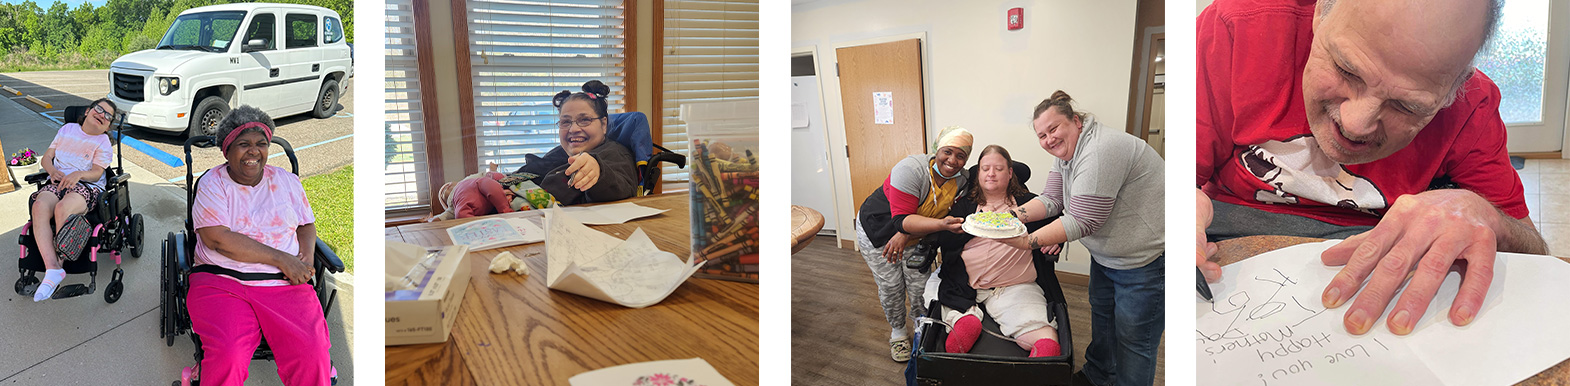 Waiver services at Echoing Hills. Pictures of helping those with disabilities. Smiling lady at a desk writing, smiling DSP with a cake for an individual, man at table writing in a card.